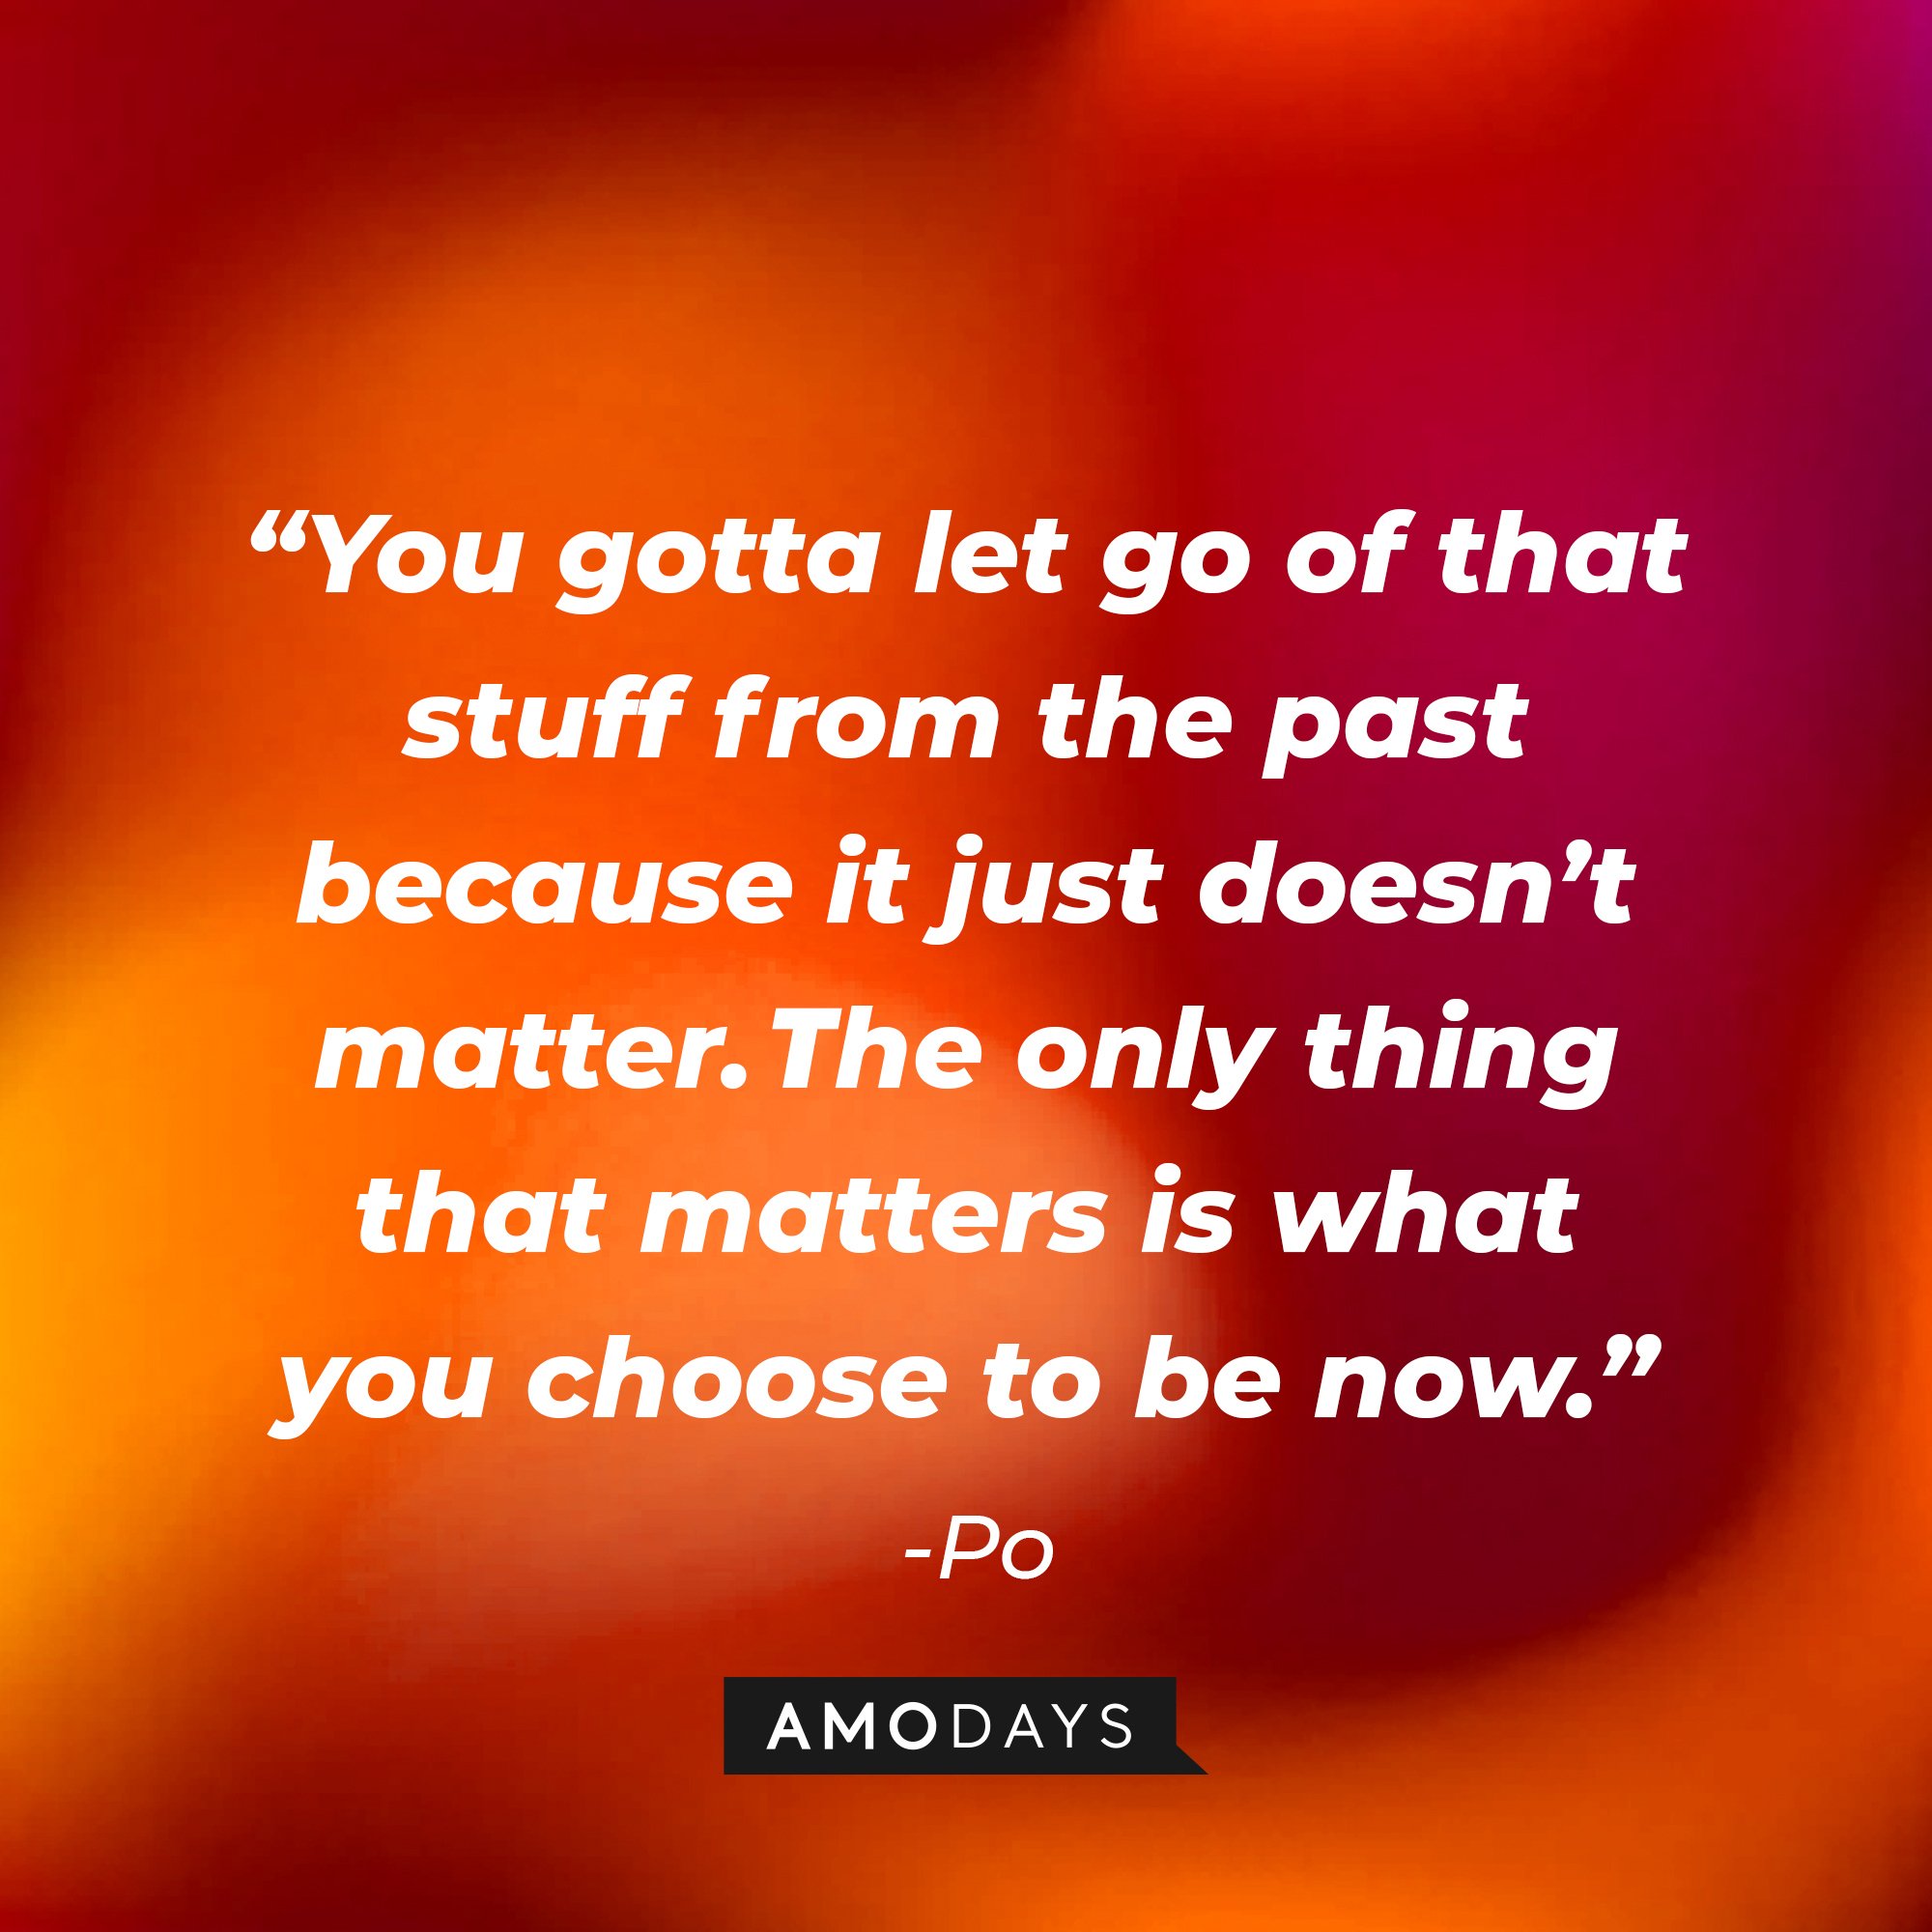 Po's quote: “You gotta let go of that stuff from the past because it just doesn’t matter. the only thing that matters is what you choose to be now.” | Image: AmoDays